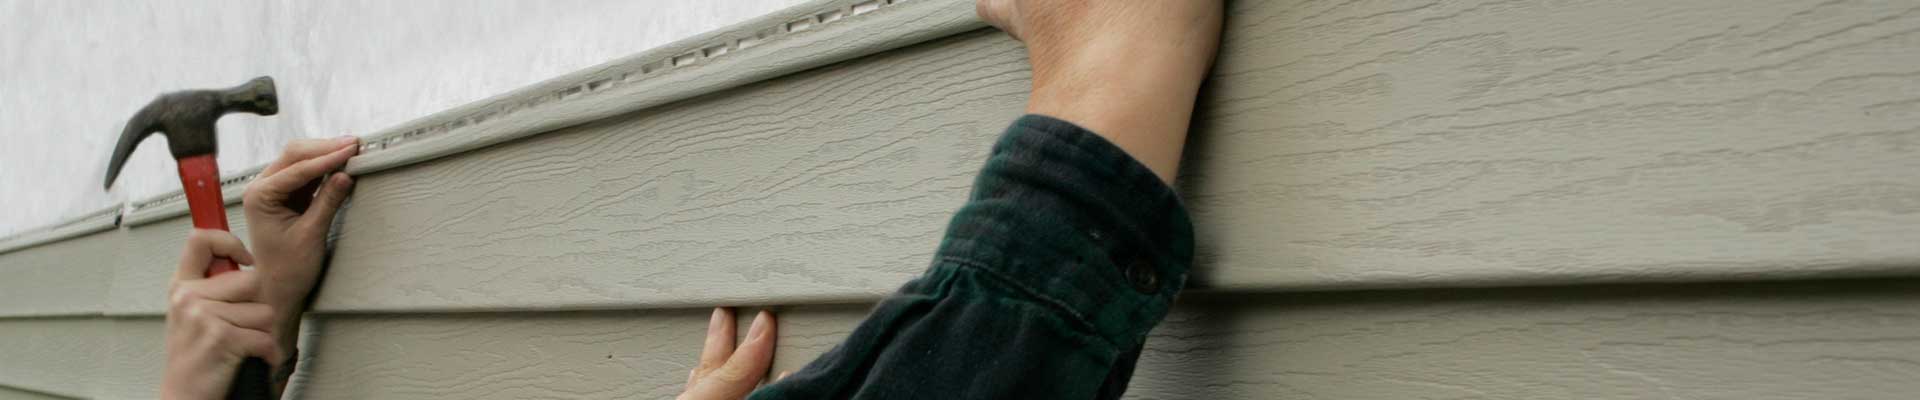 installing siding on a house